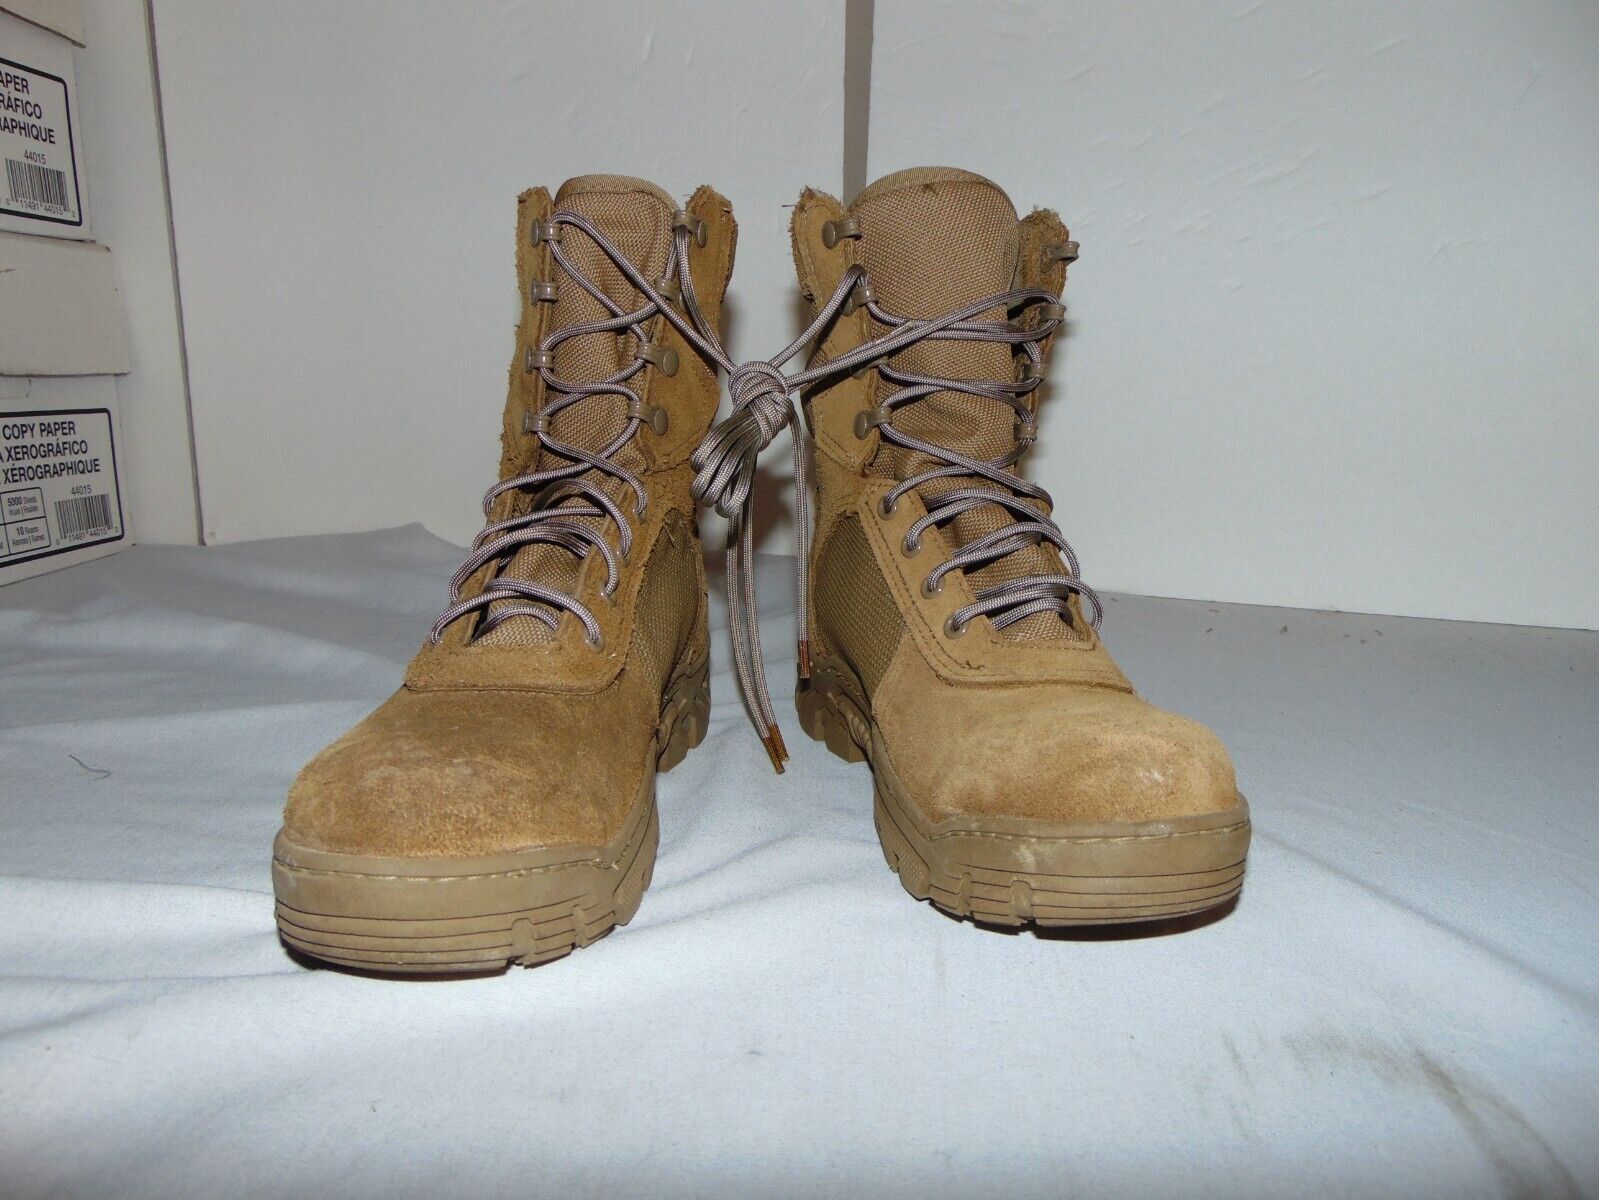 USGI ISSUE COMBAT BOOTS HOT WEATHER COYOTE BROWN THOROGOOD 8.5 M